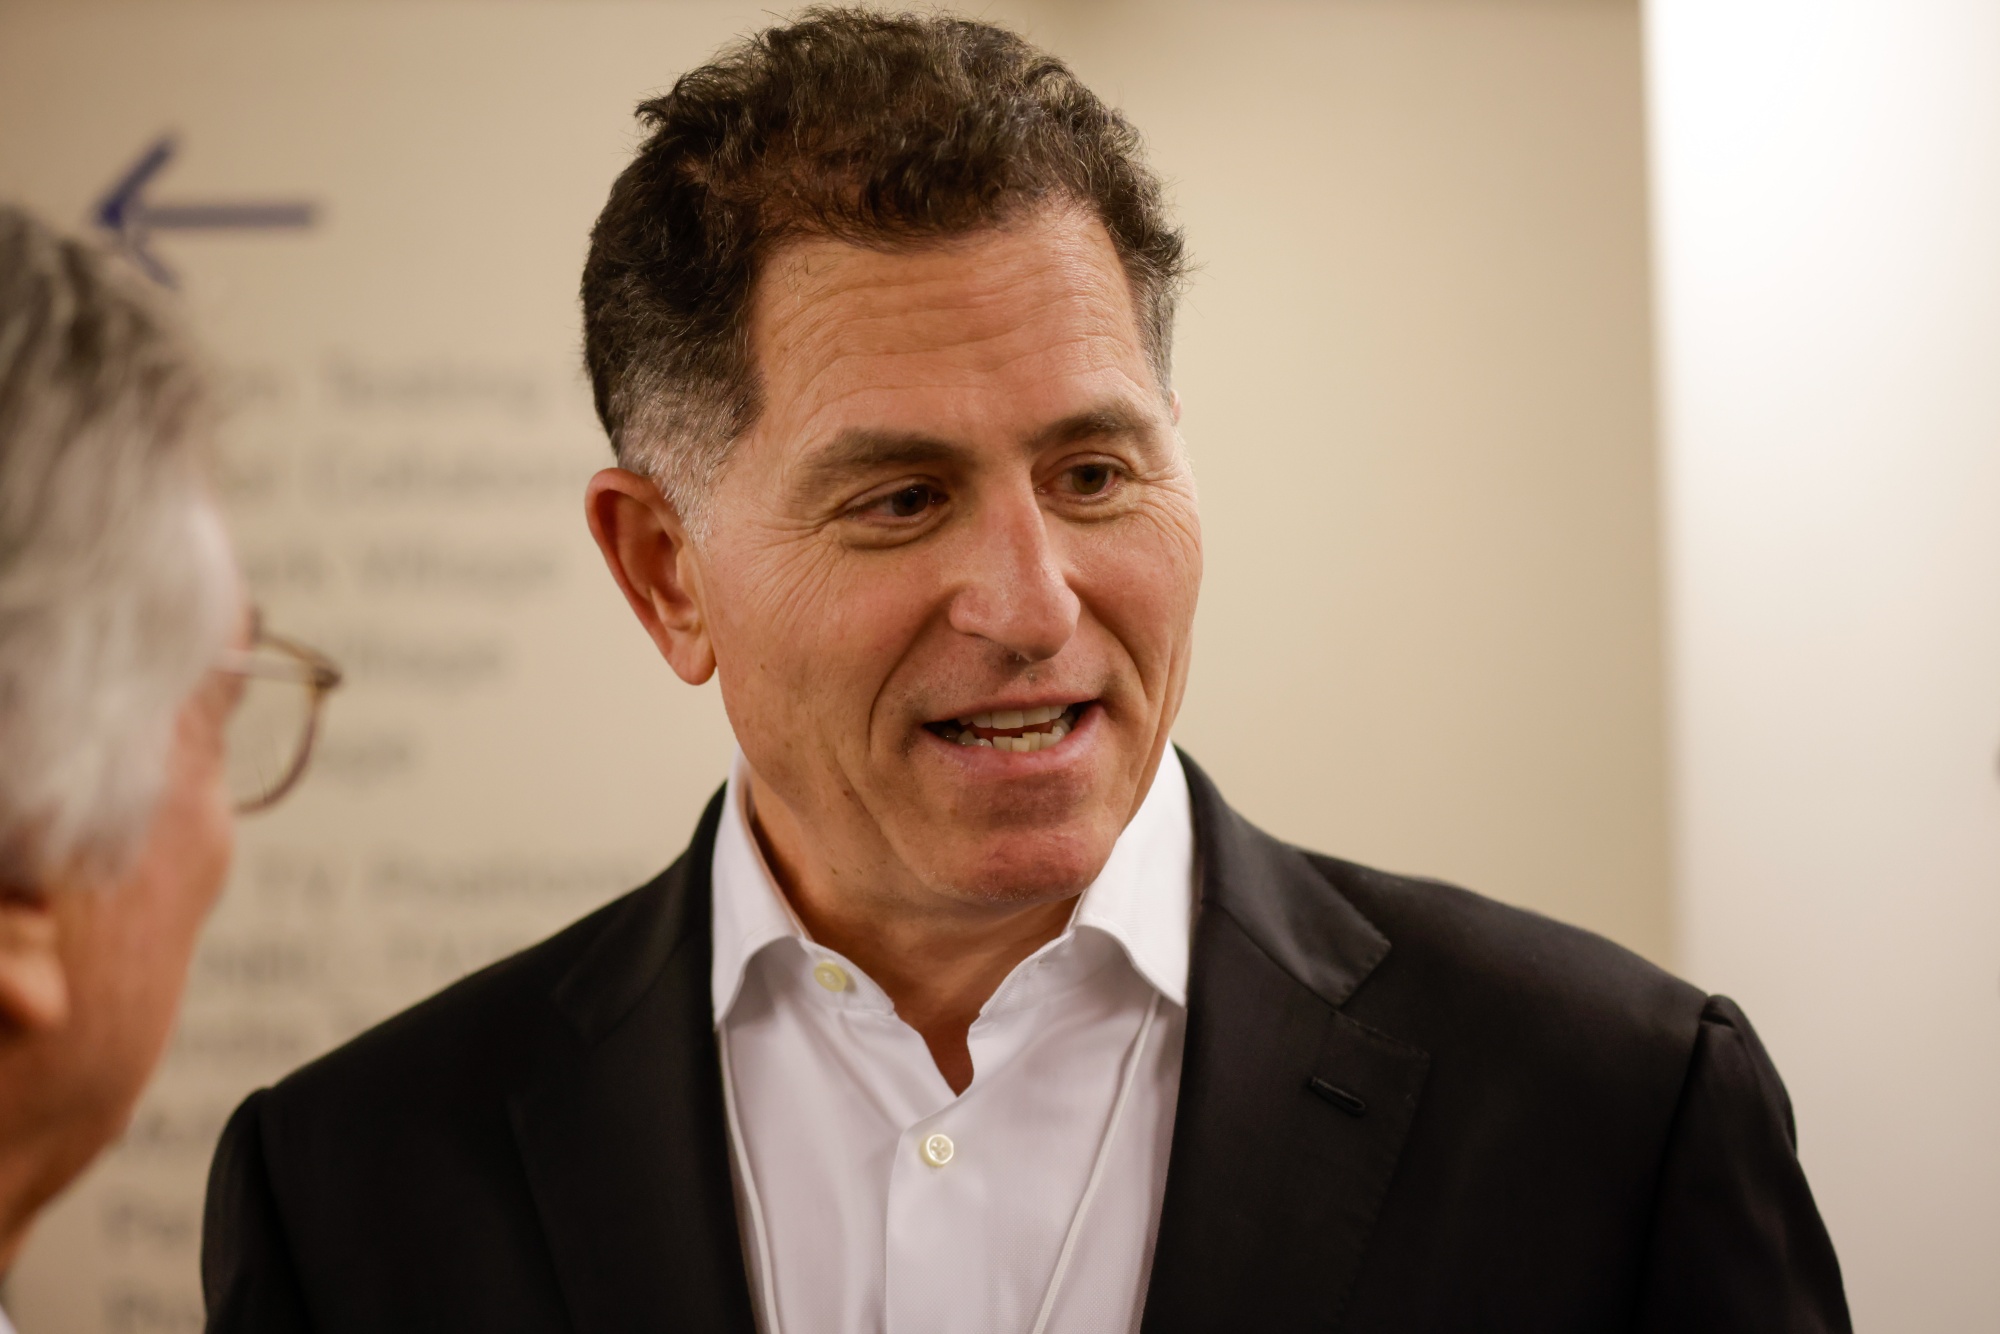 
What Michael Dell Really Thinks About Venture Capital: A Candid Interview